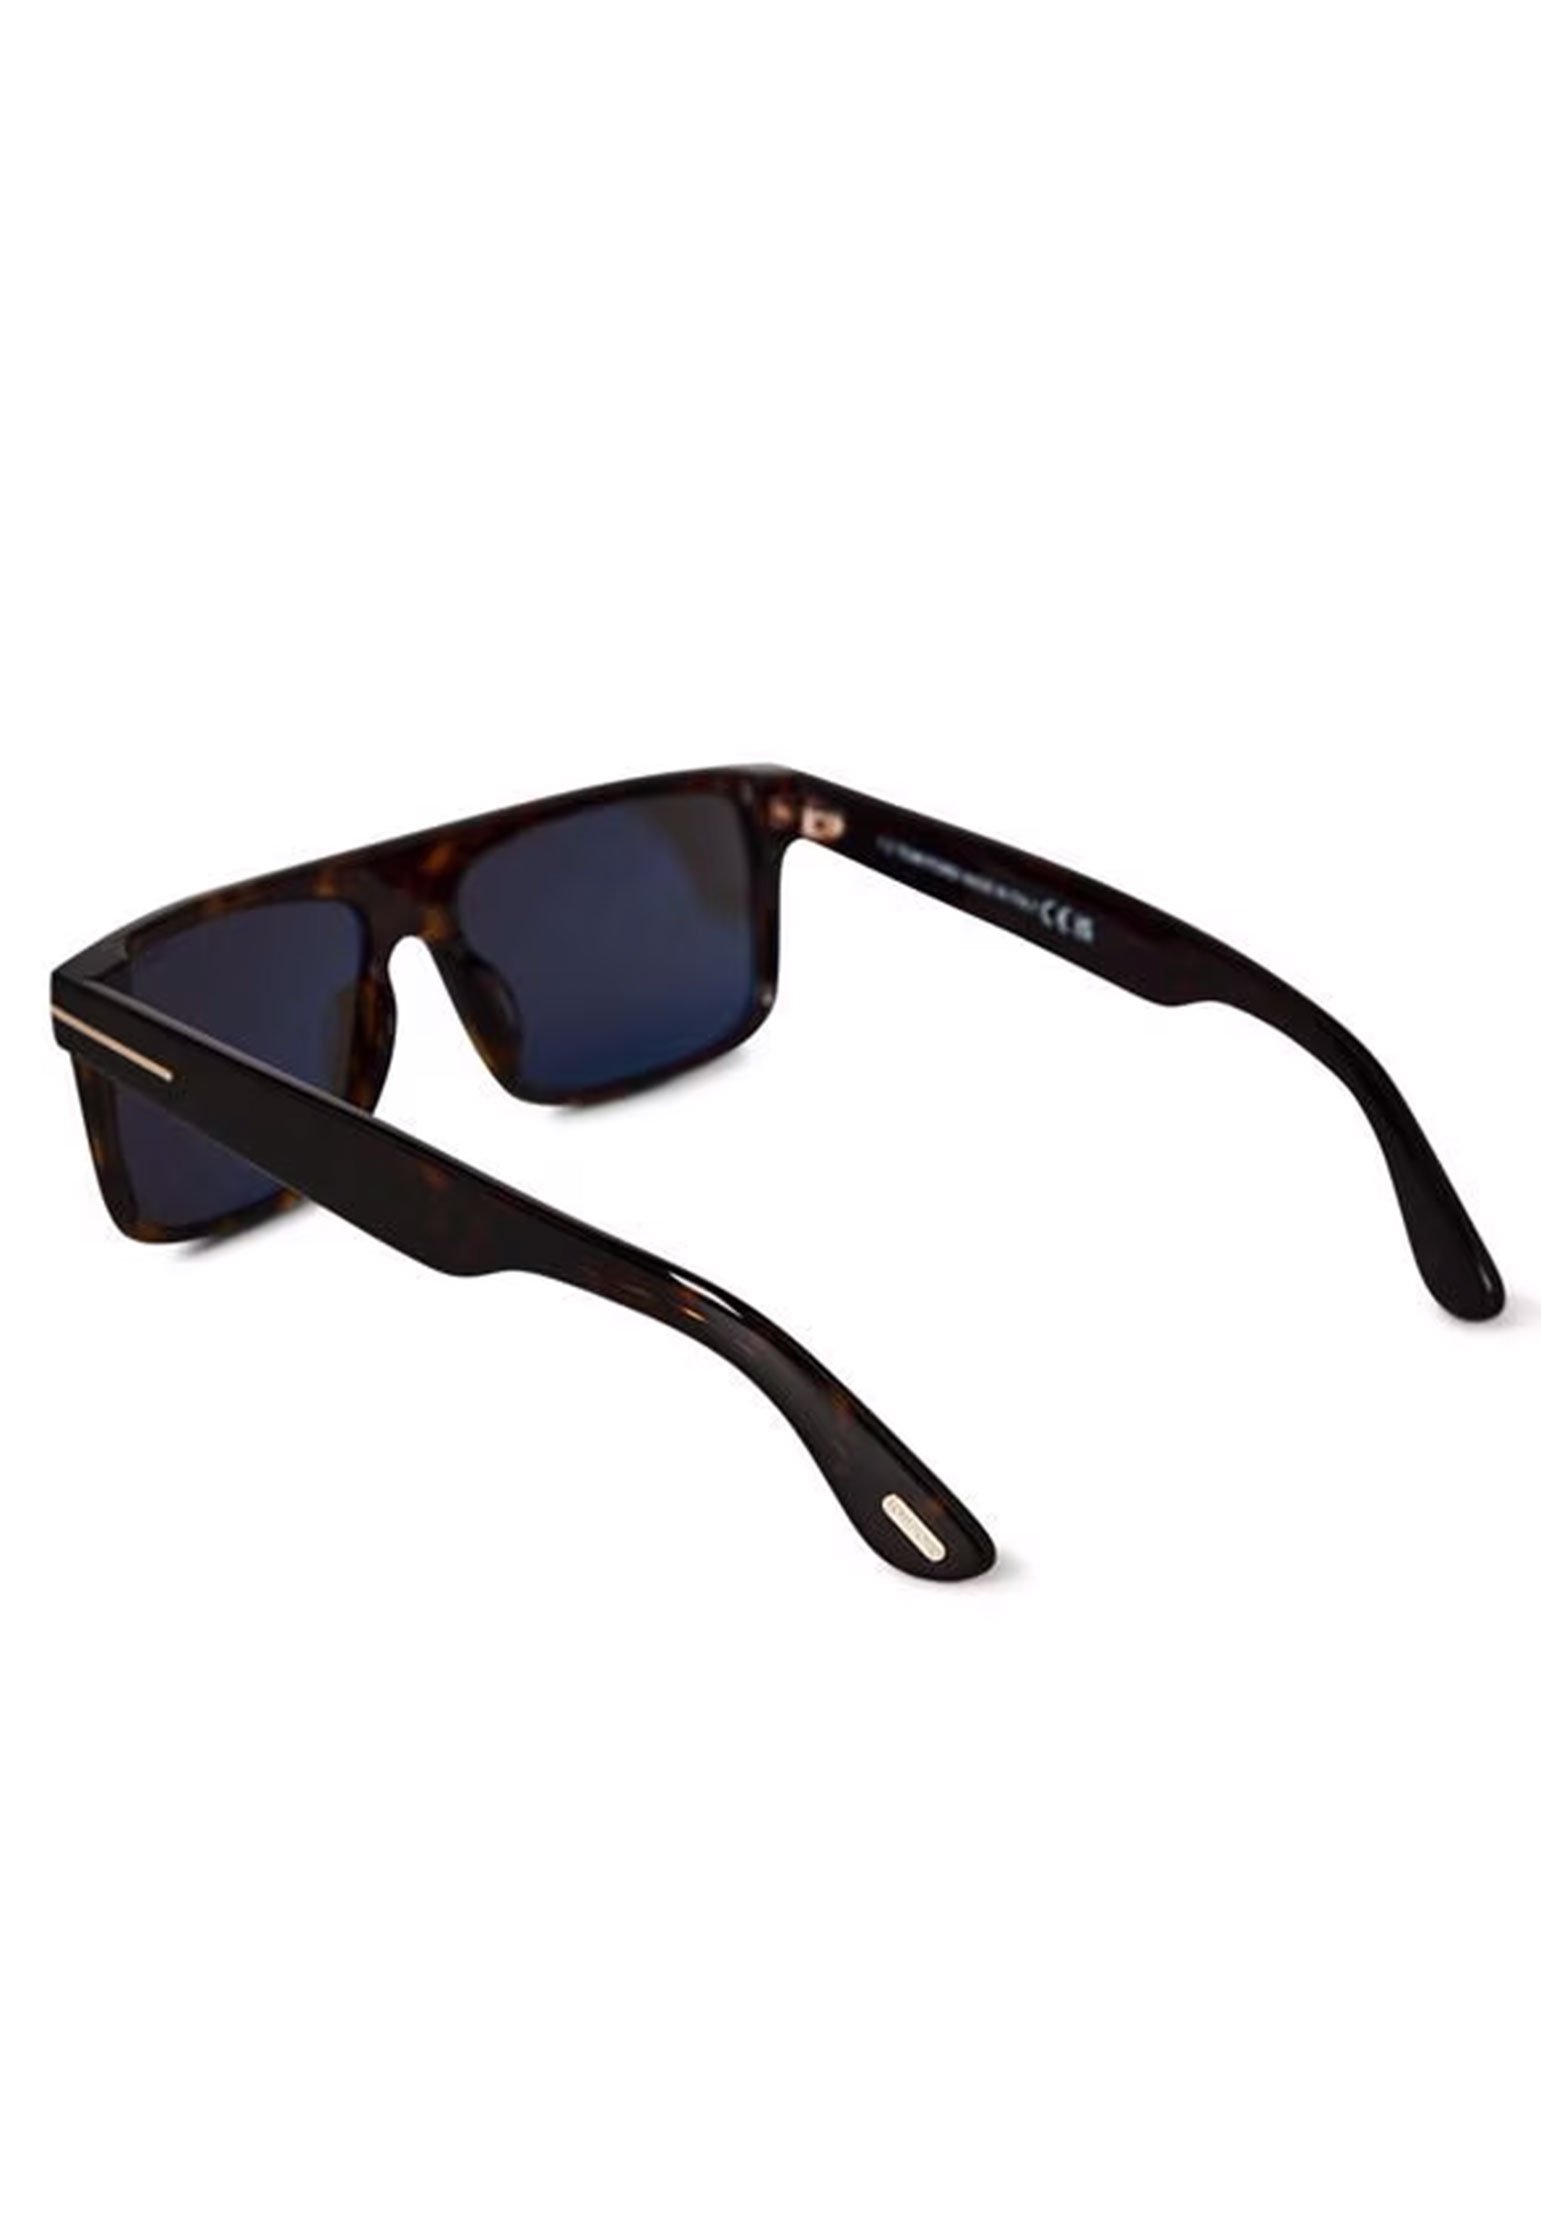 Sunglass TOM FORD Color: black (Code: 1661) in online store Allure